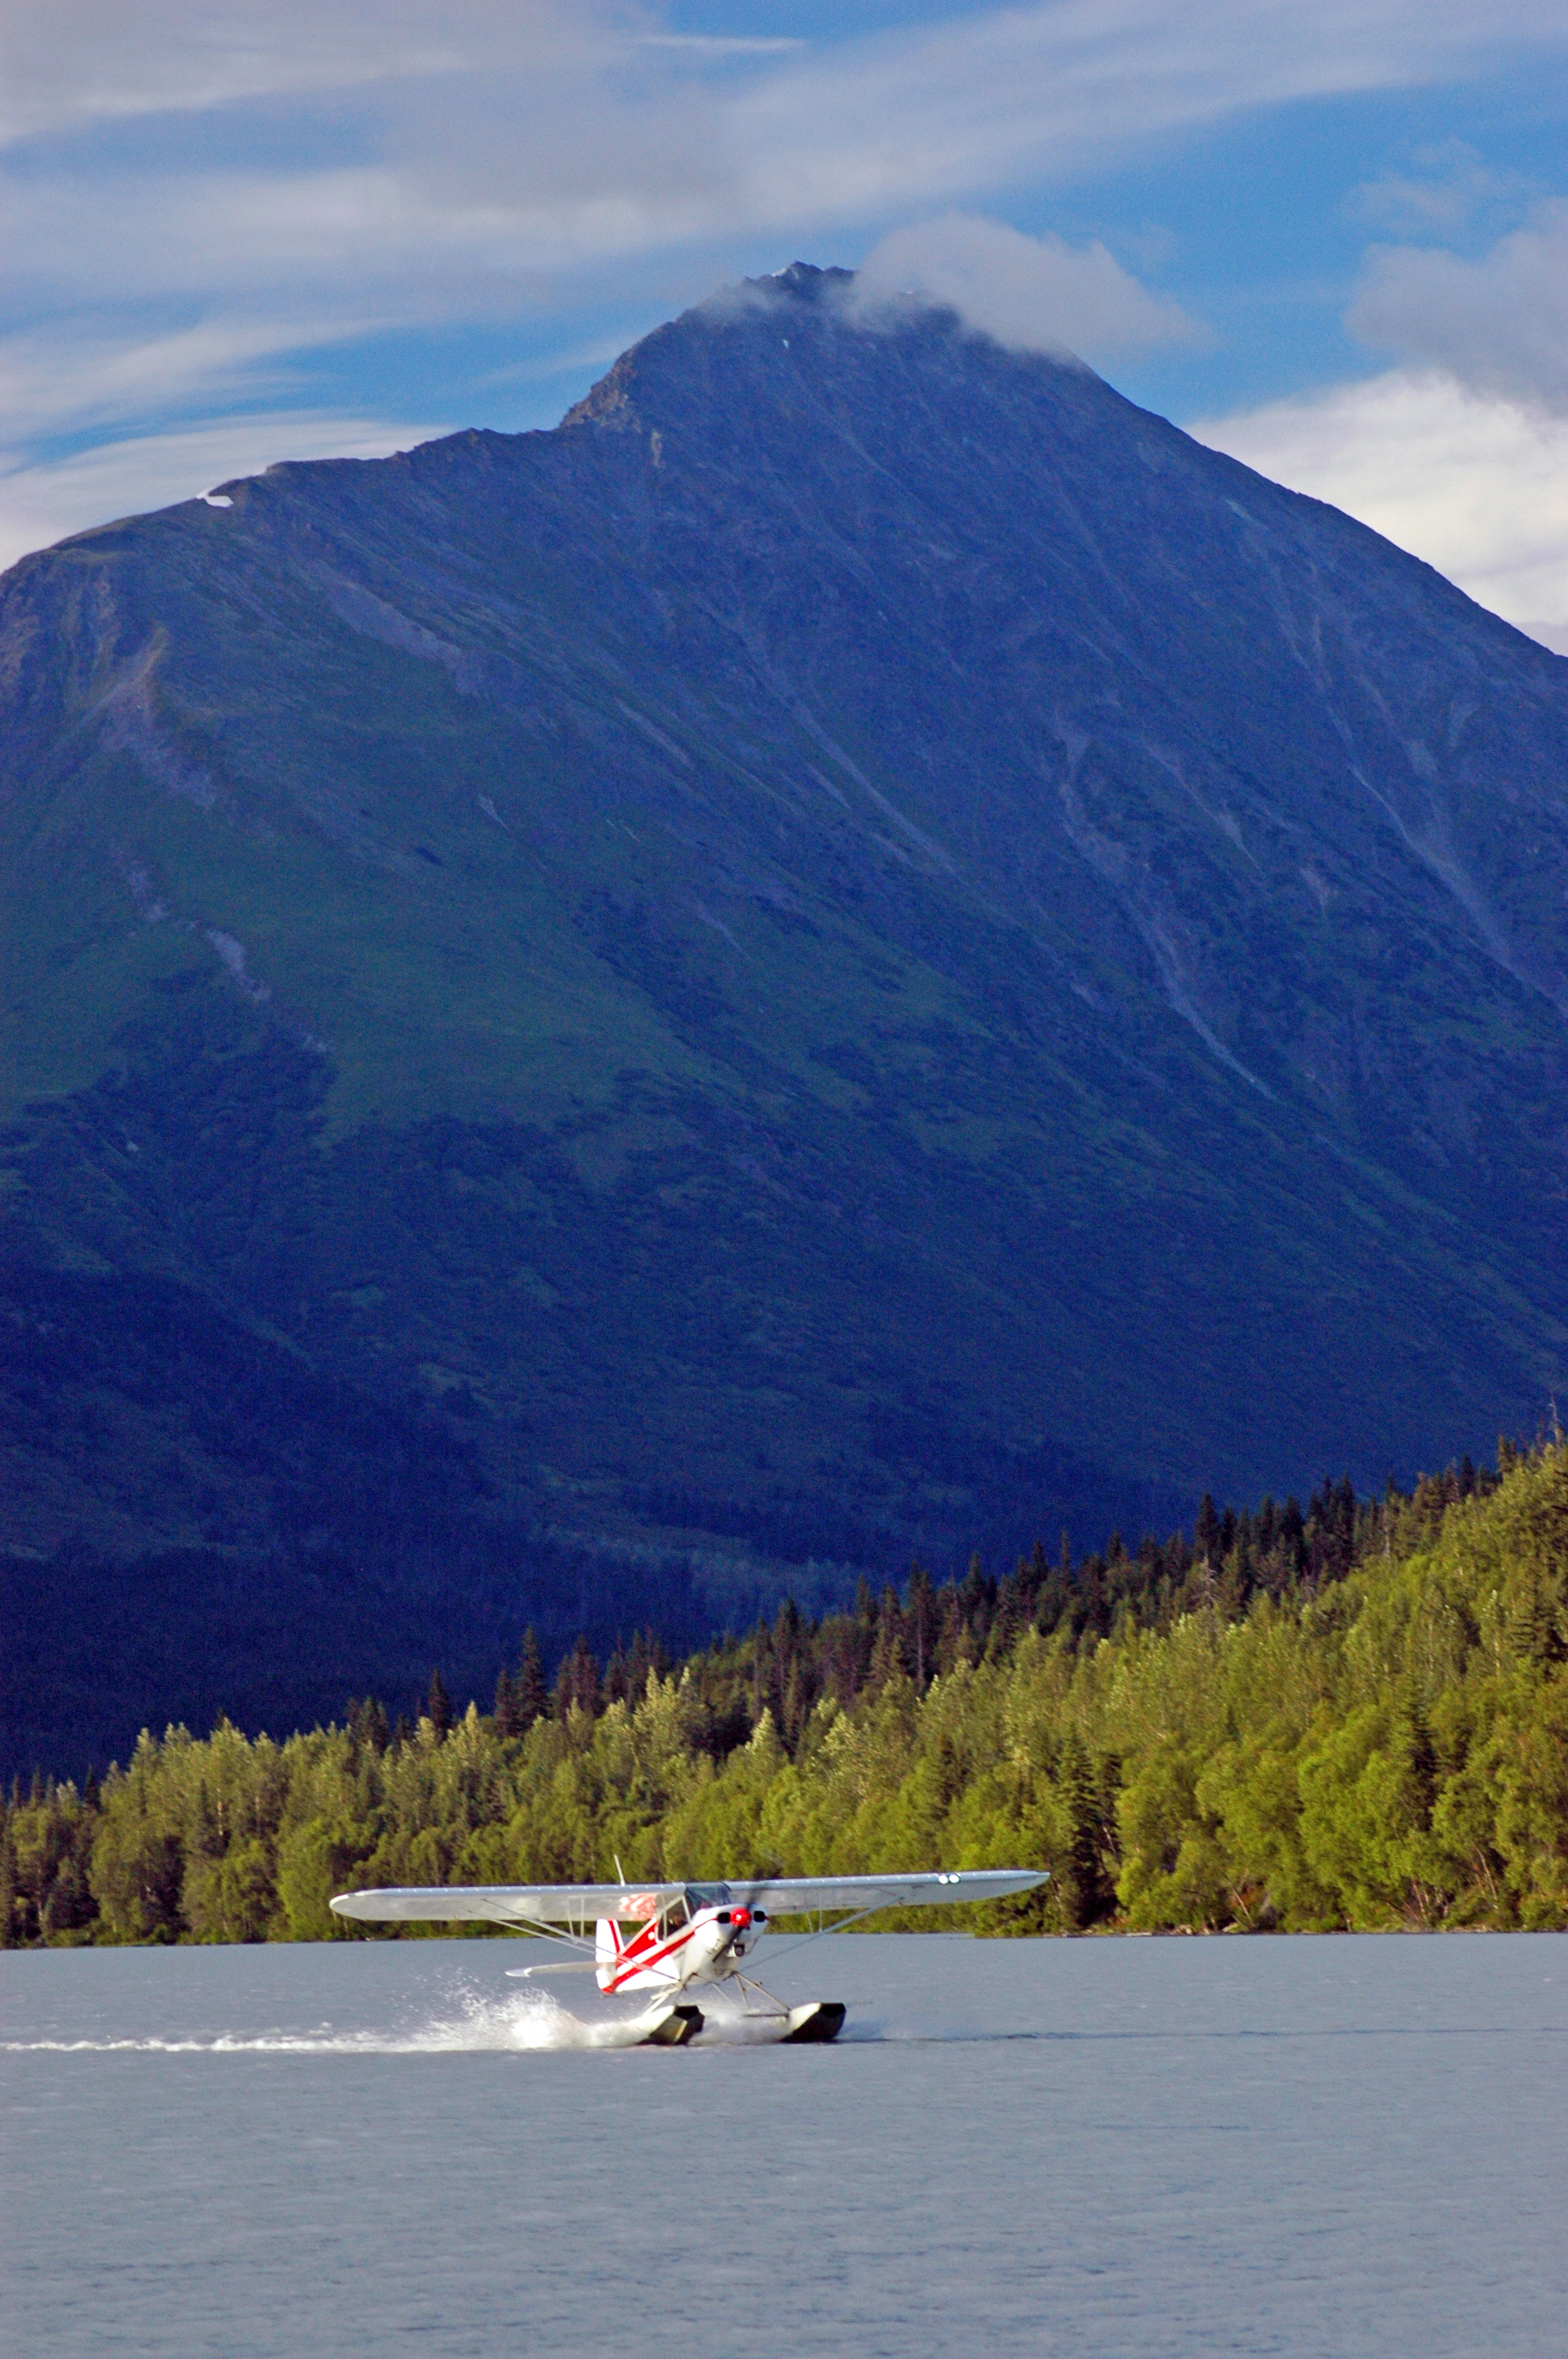 Summer days in Alaska are long and offer more time for training. This photo of a student landing at Upper Trail Lake was taken just before 9 p.m. Photo by Crista Worthy.